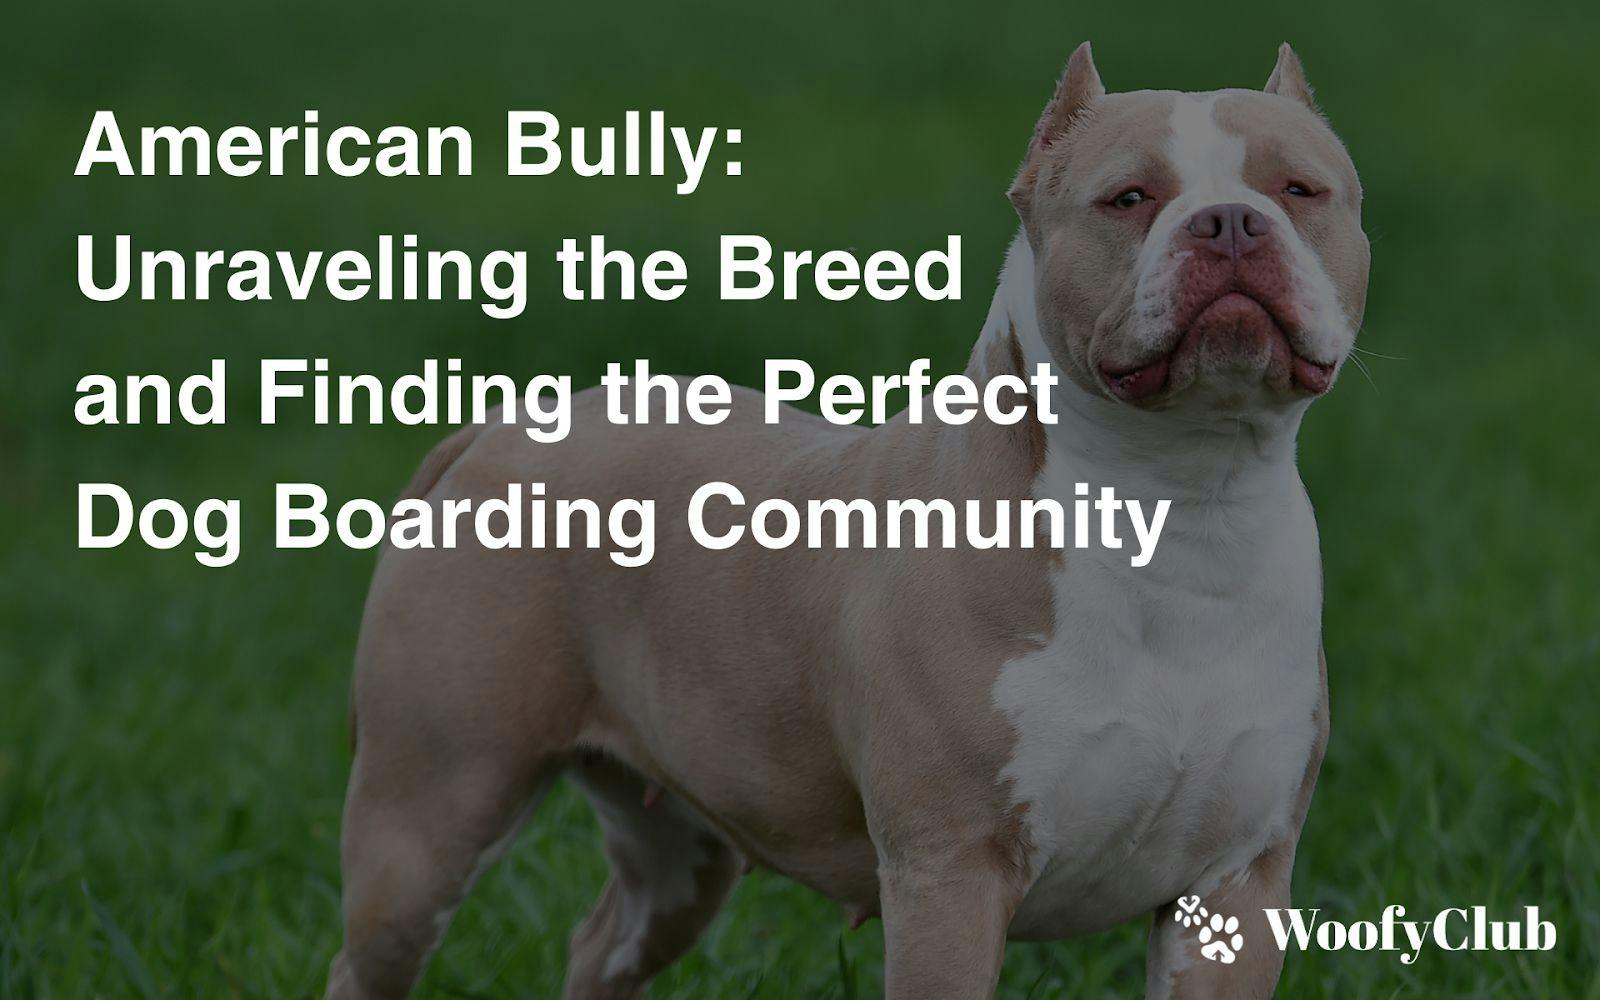 American Bully: Unraveling The Breed And Finding The Perfect Dog Boarding Community